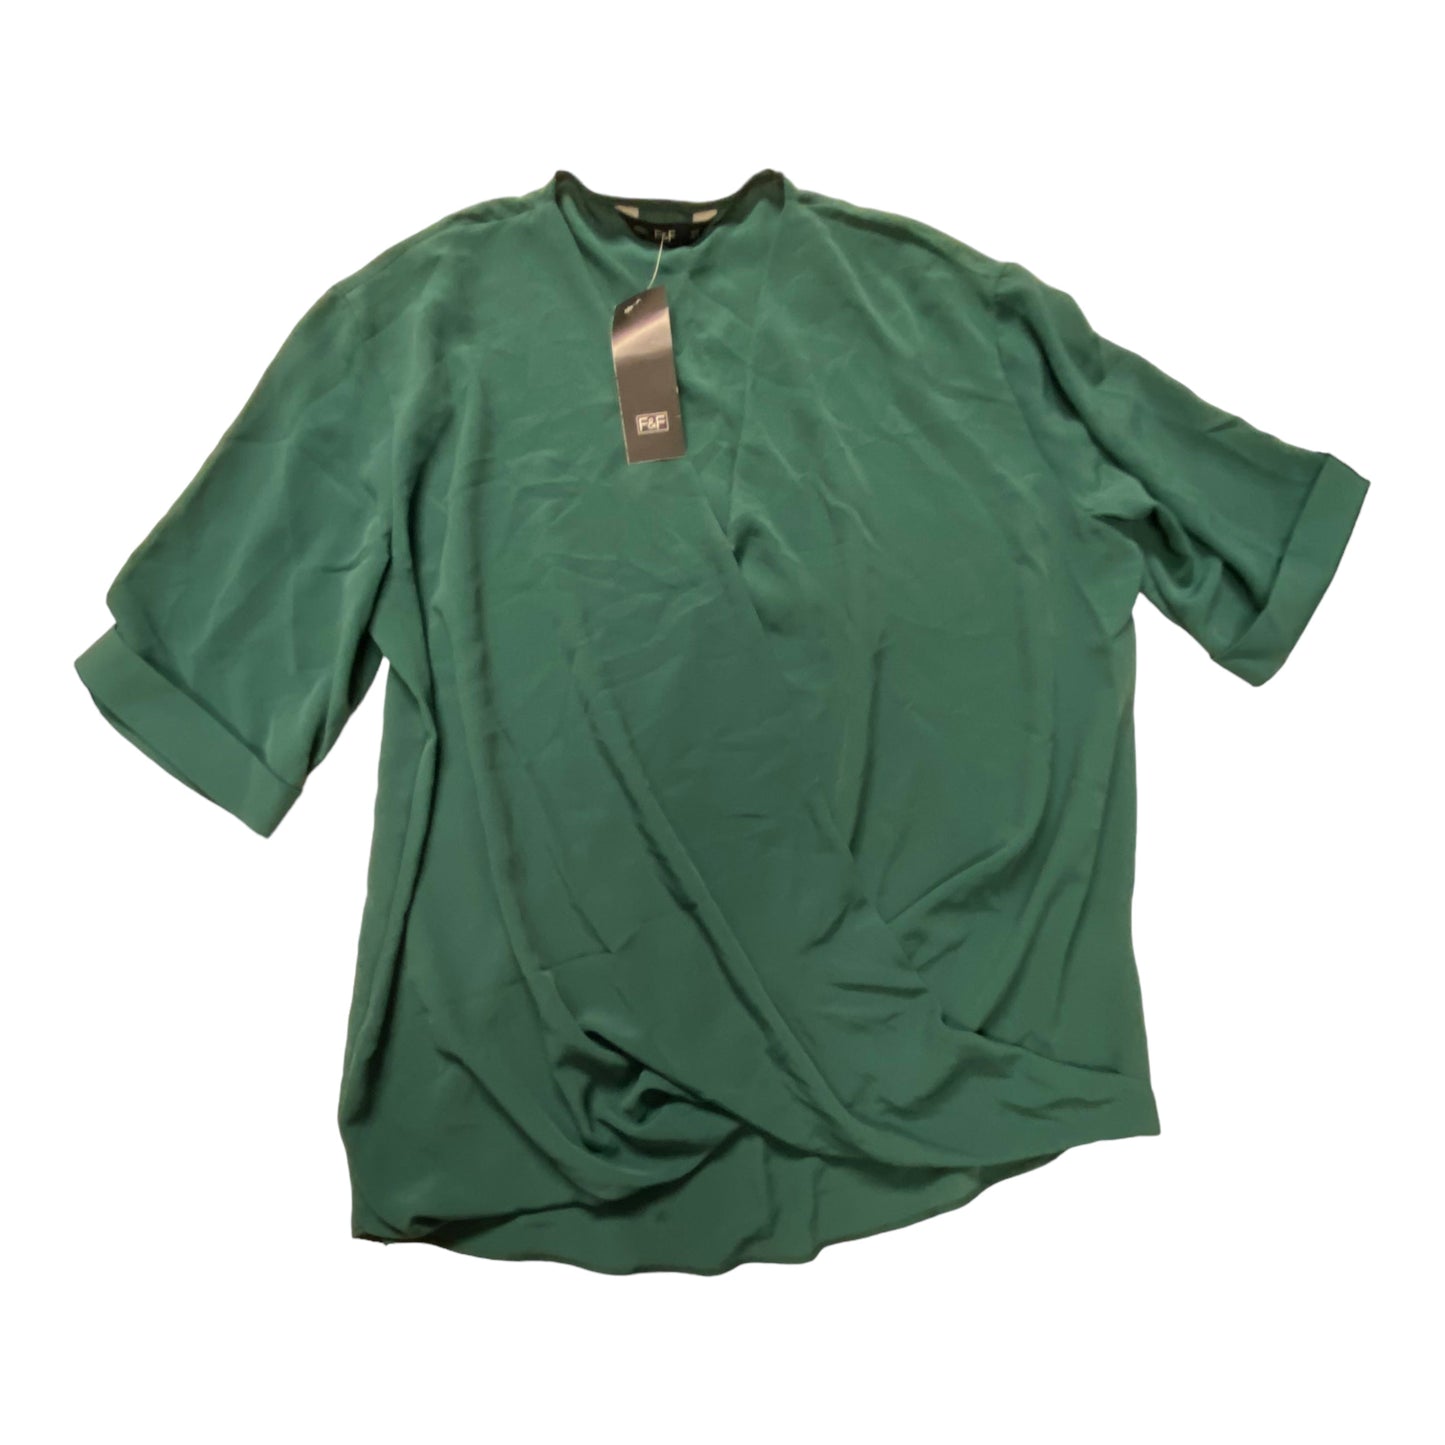 Green Top Short Sleeve F&f, Size 12